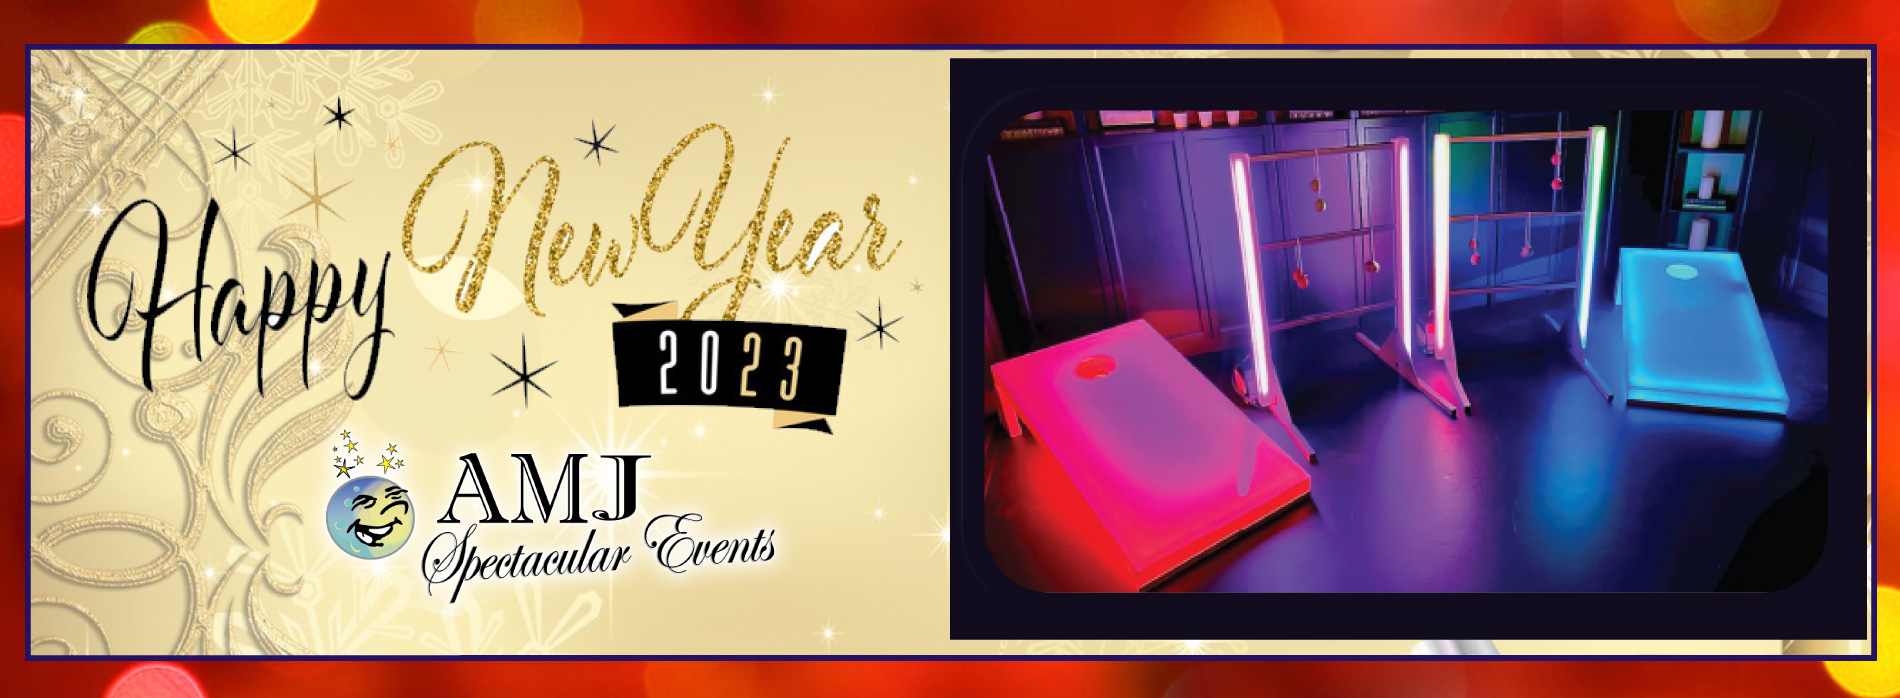 AMJ Spectacular Events presents Happy New Years Parties 2023 Themed Rentals